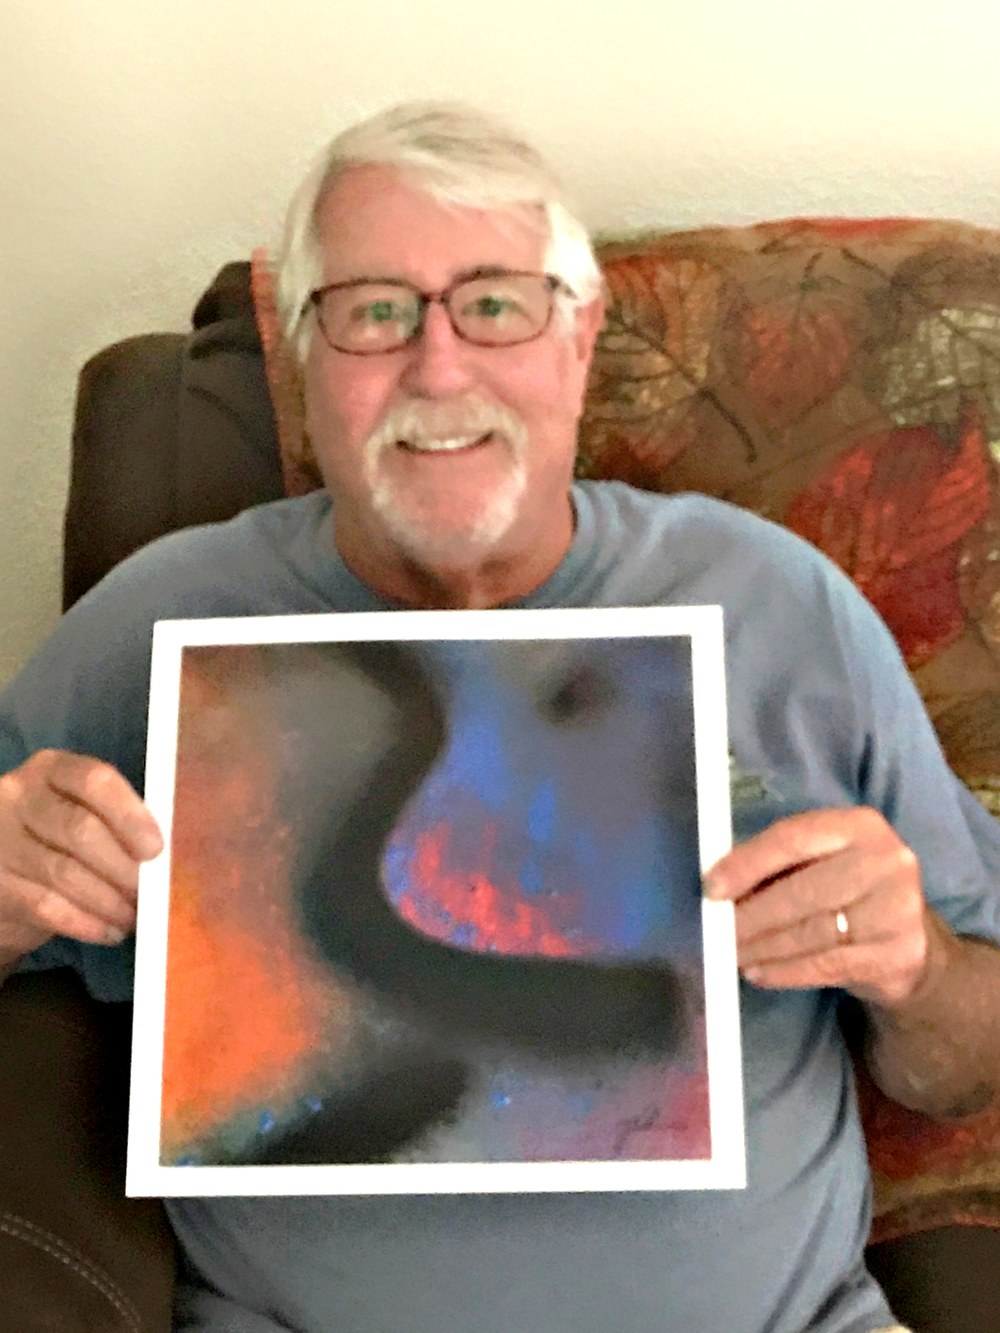 Dale - the winer of our August Fire Road art giveaway!